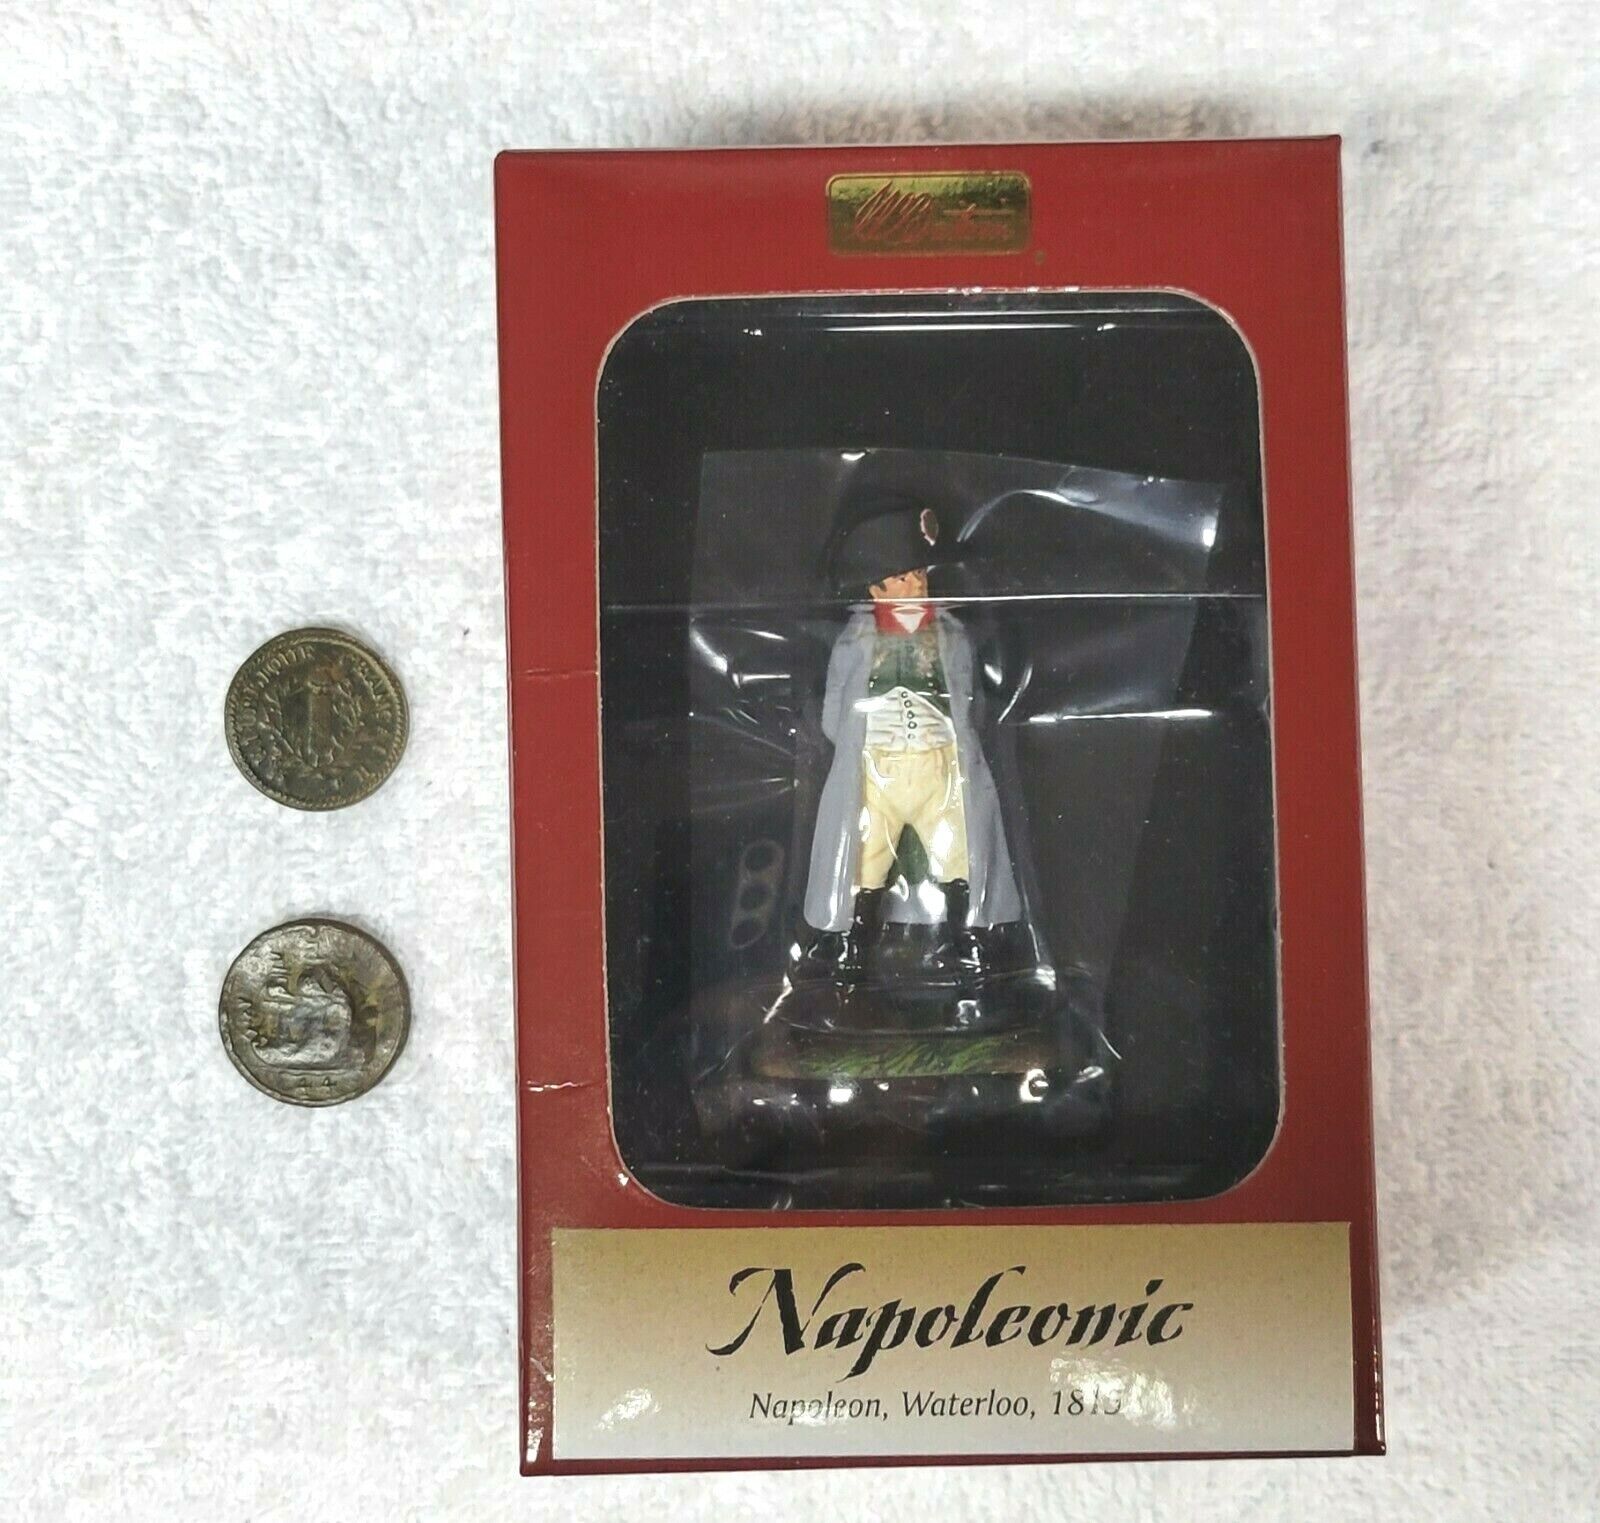 Britain's Napoleon-Waterloo,1815, #36007 with two dug Napoleonic French buttons